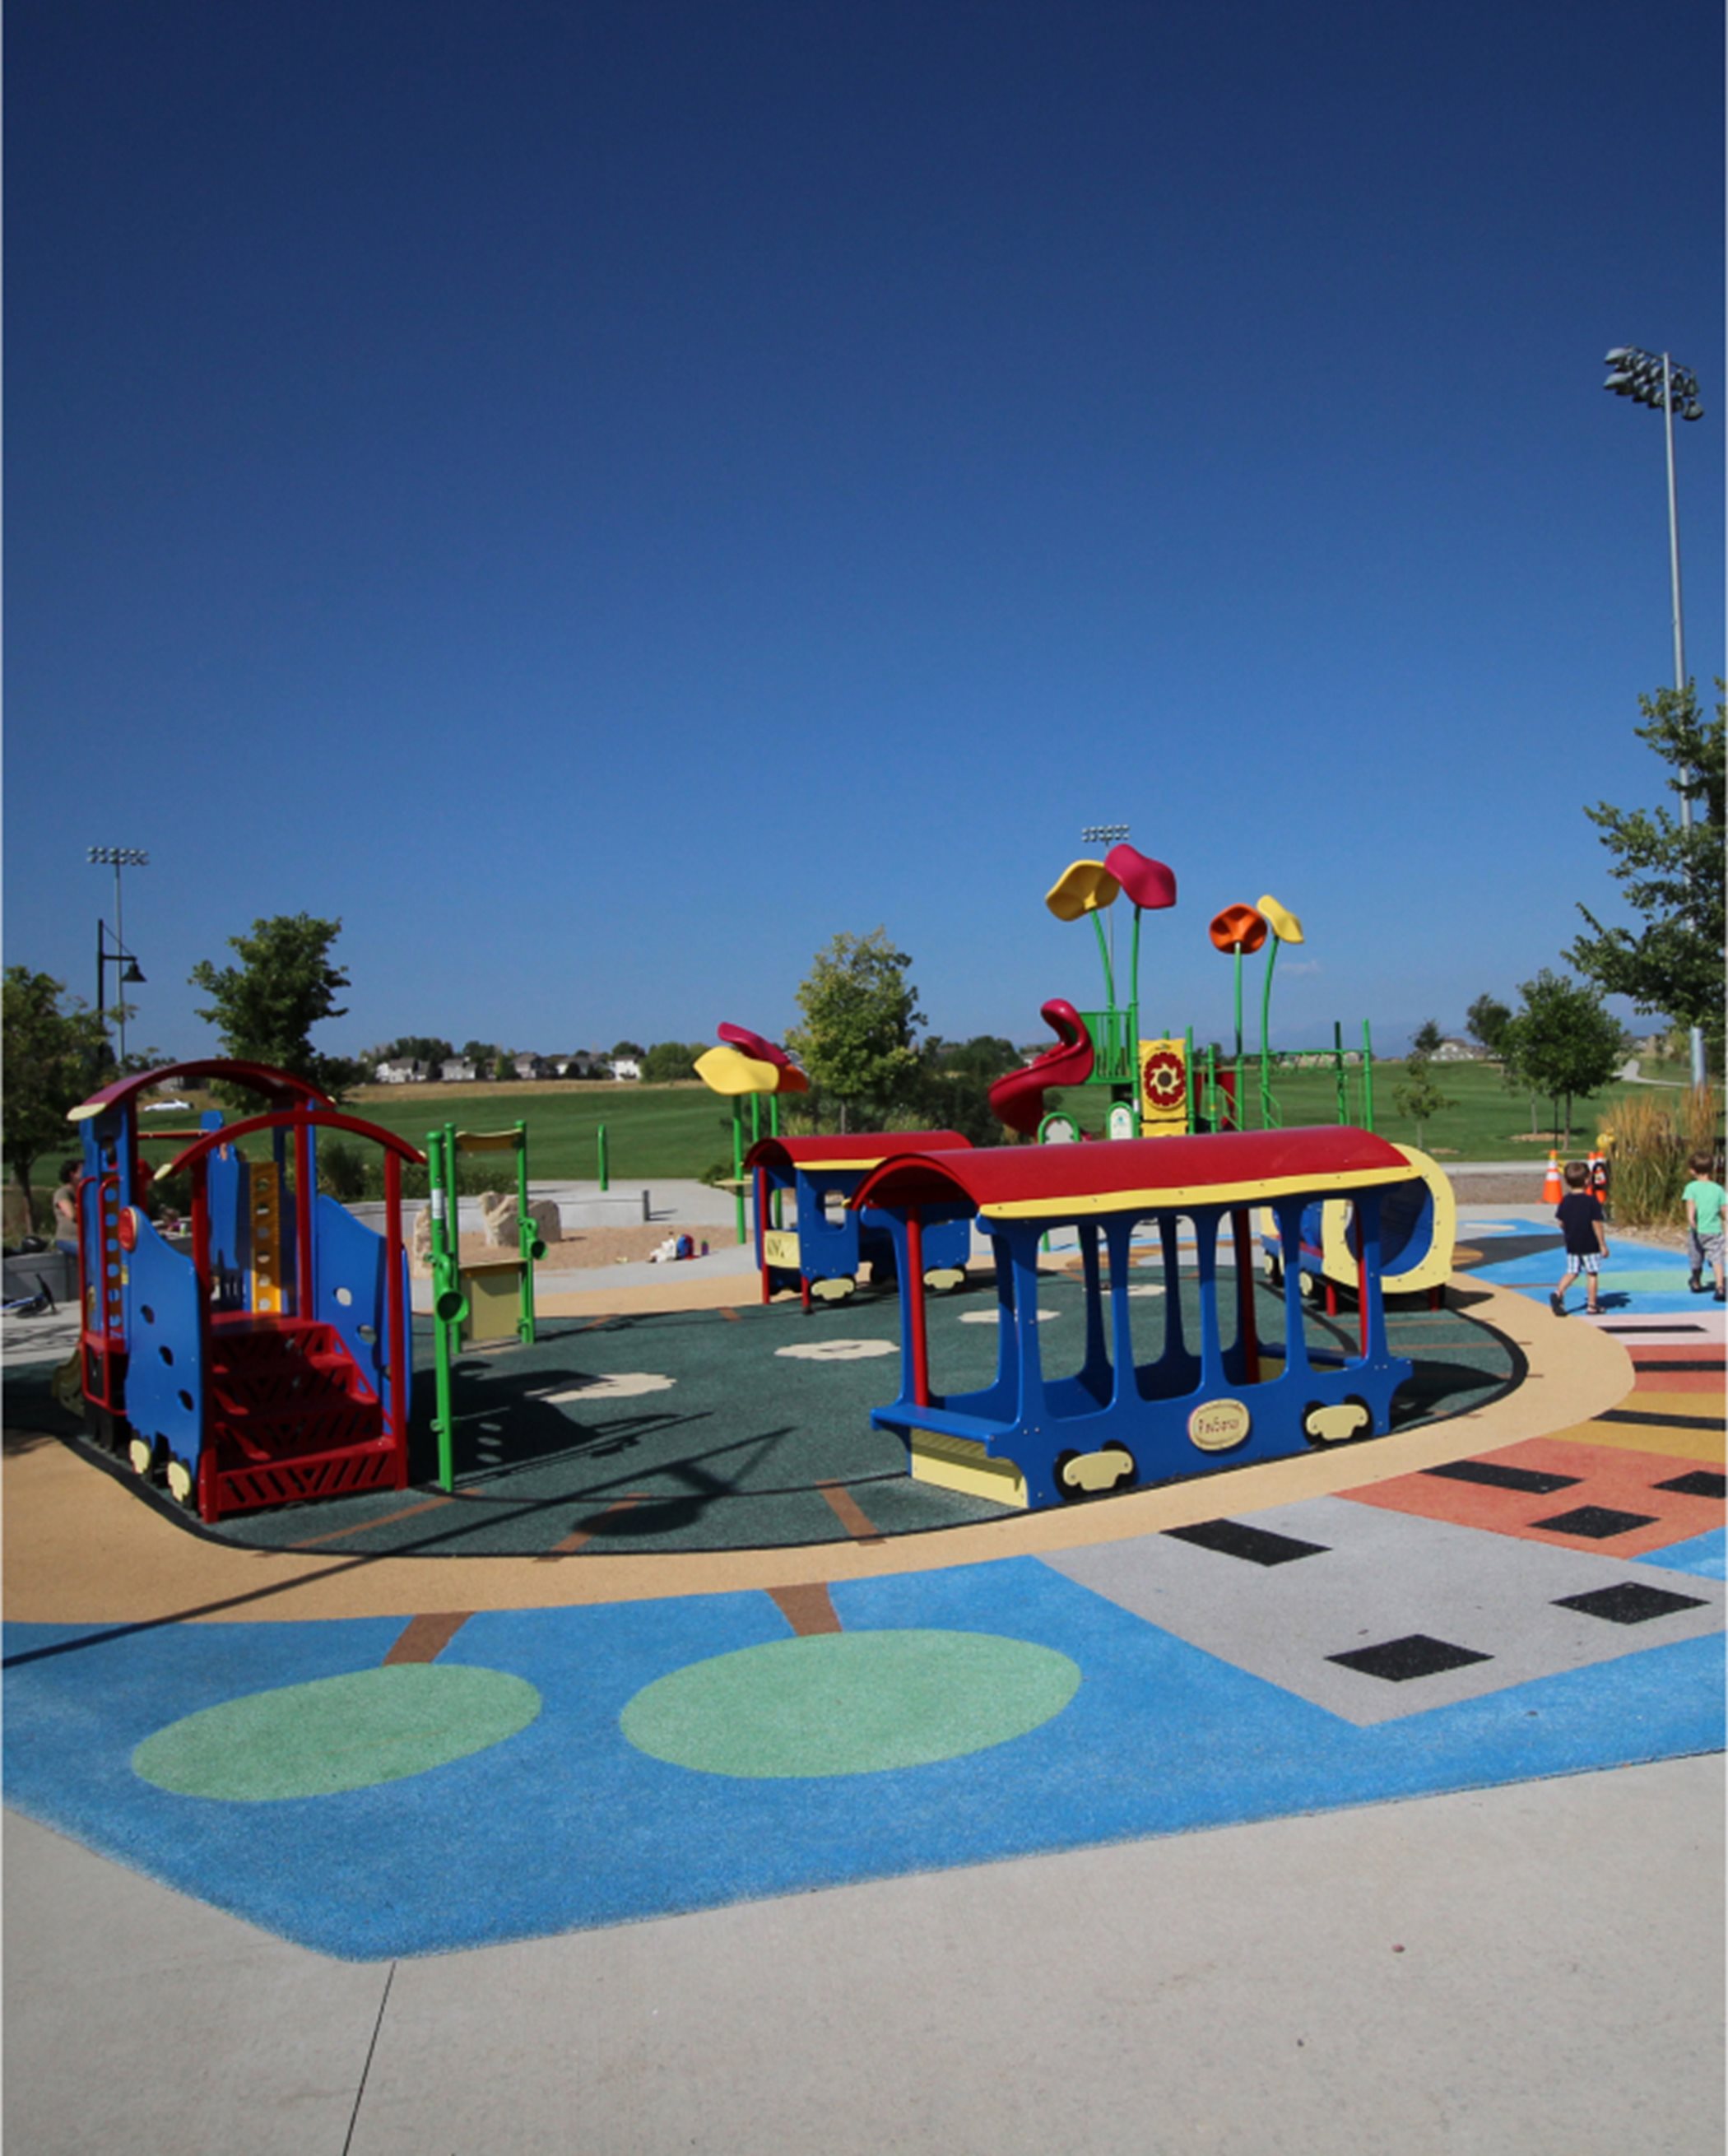 Wildrose (Coming Soon) parks nearby with fun playground equipment for kids